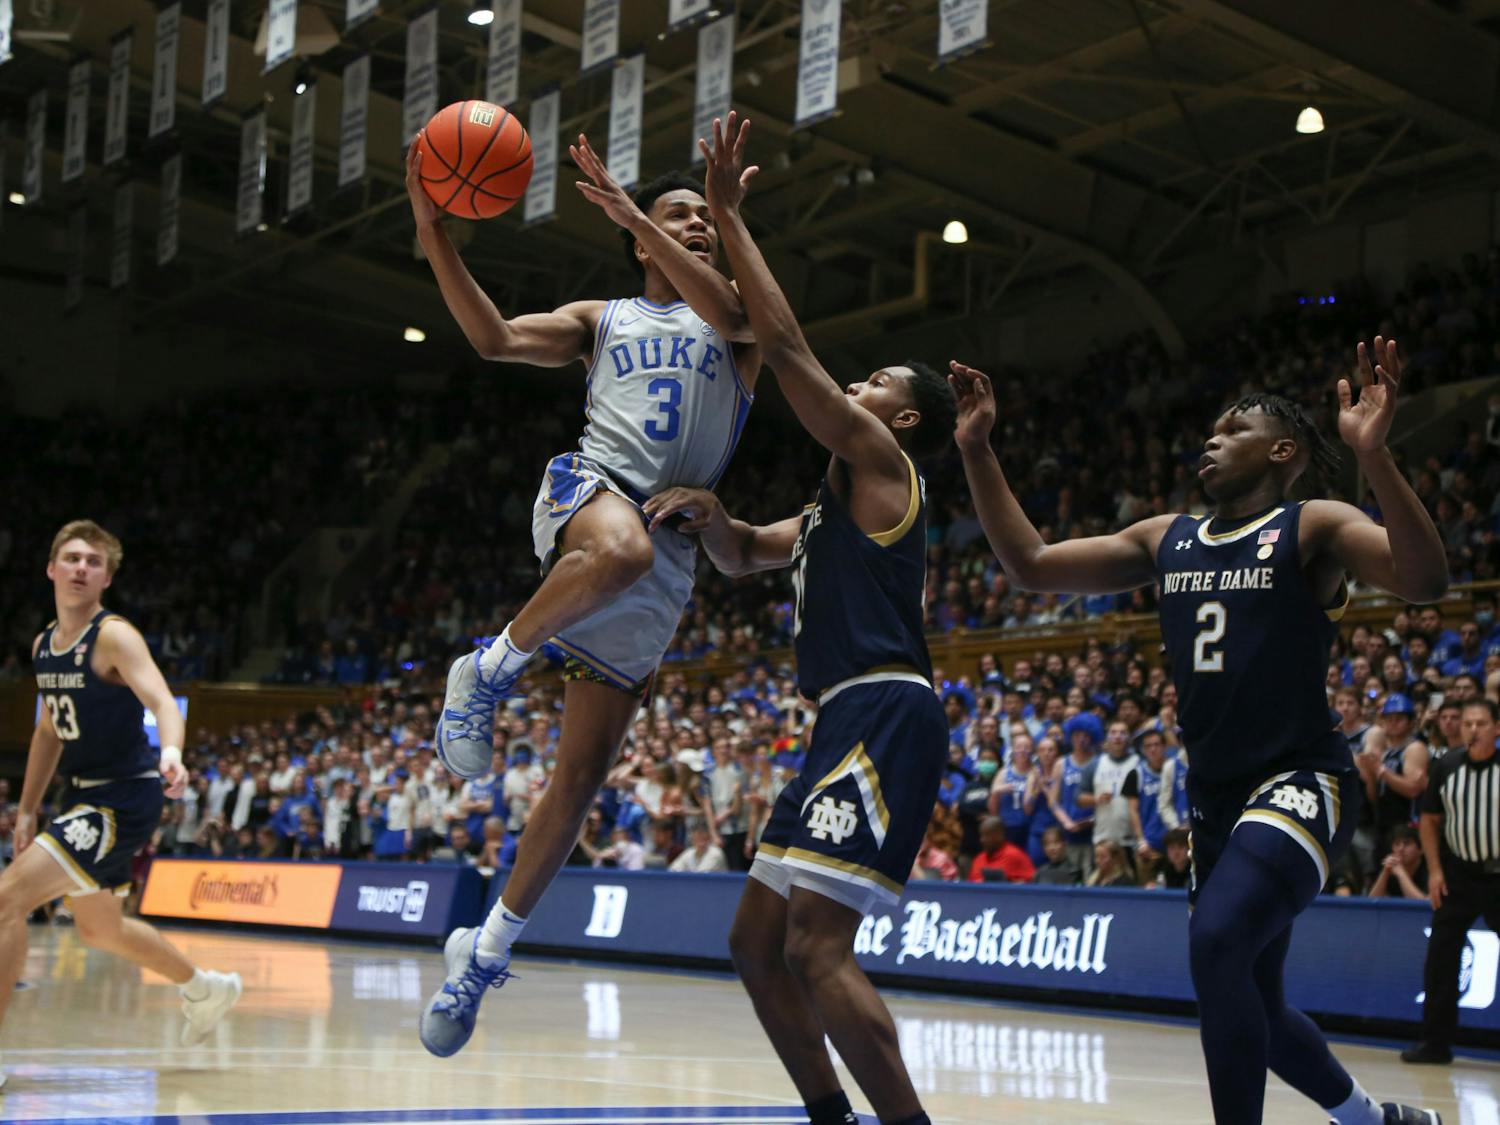 Jeremy Roach in the first half of Duke's win against Notre Dame.